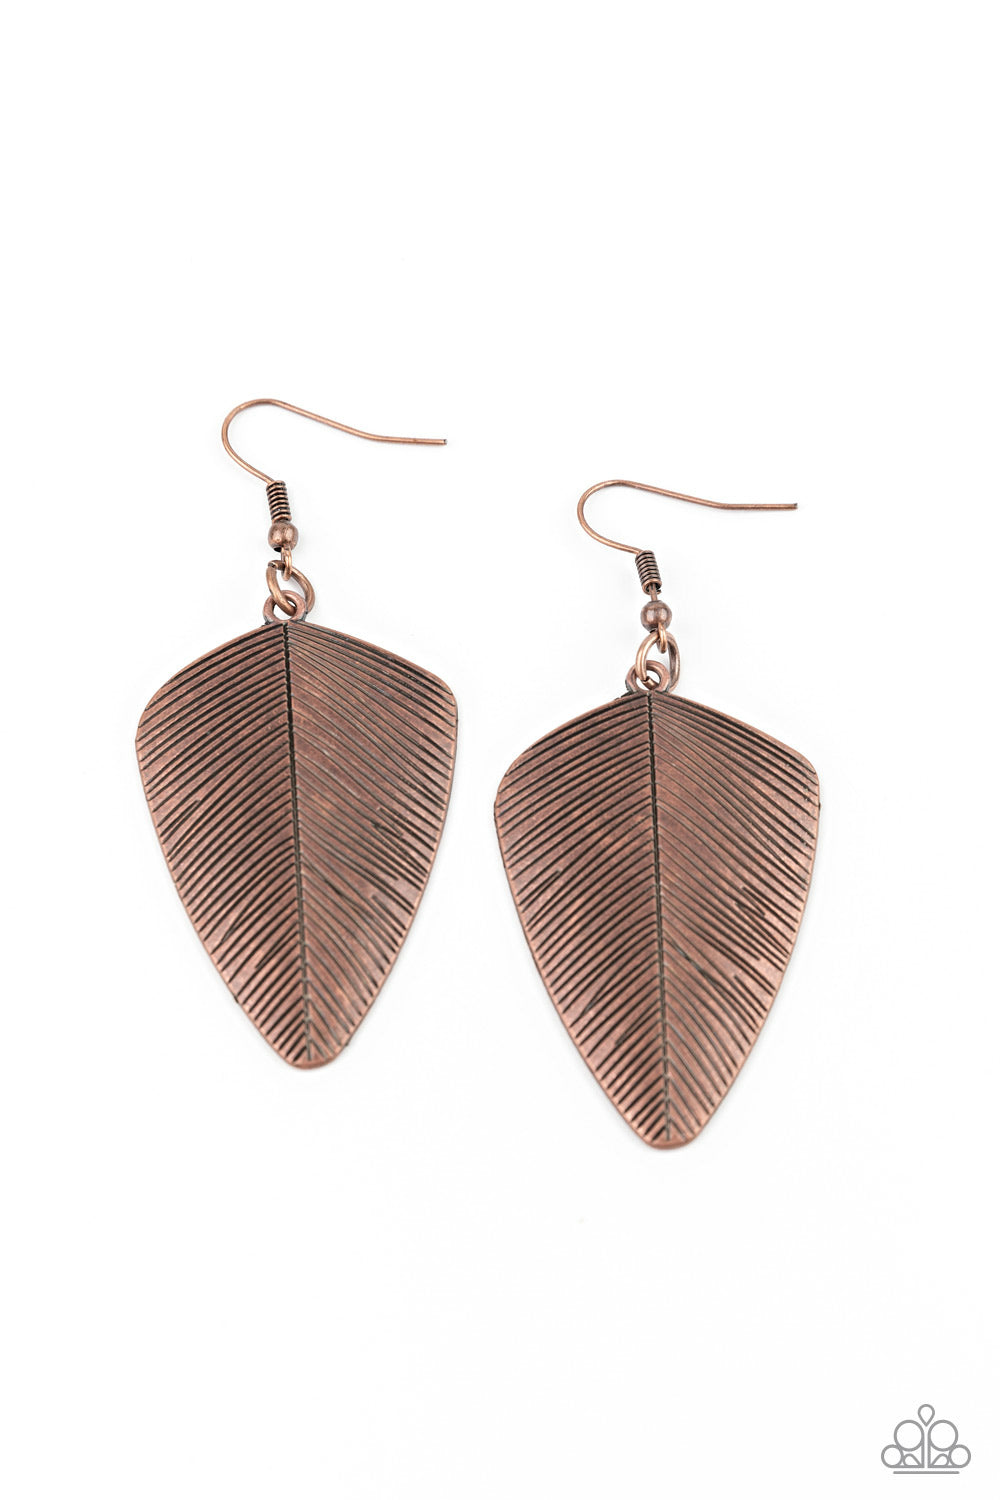 One Of The Flock - Copper Earrings - Princess Glam Shop